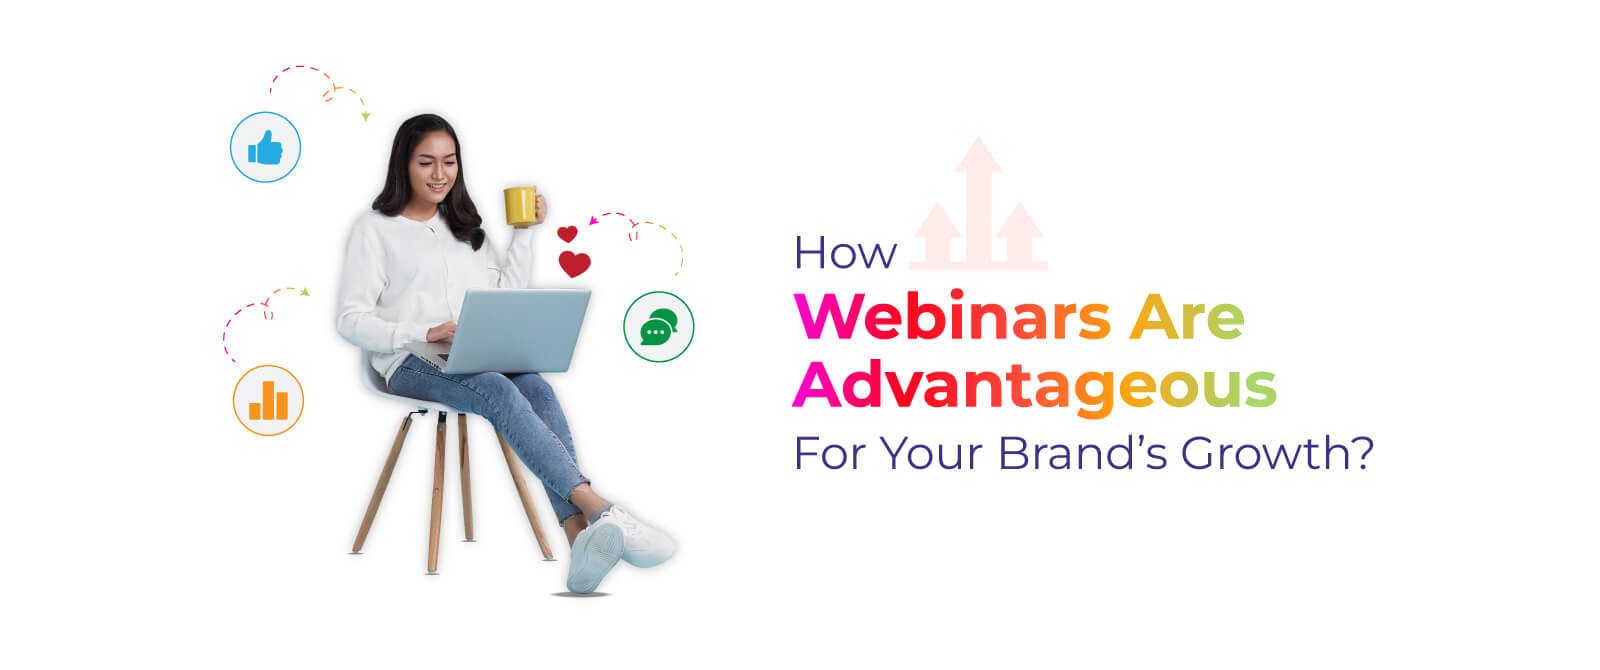 Online Webinars: The Key to Unlocking Your Brand’s Growth and Expansion